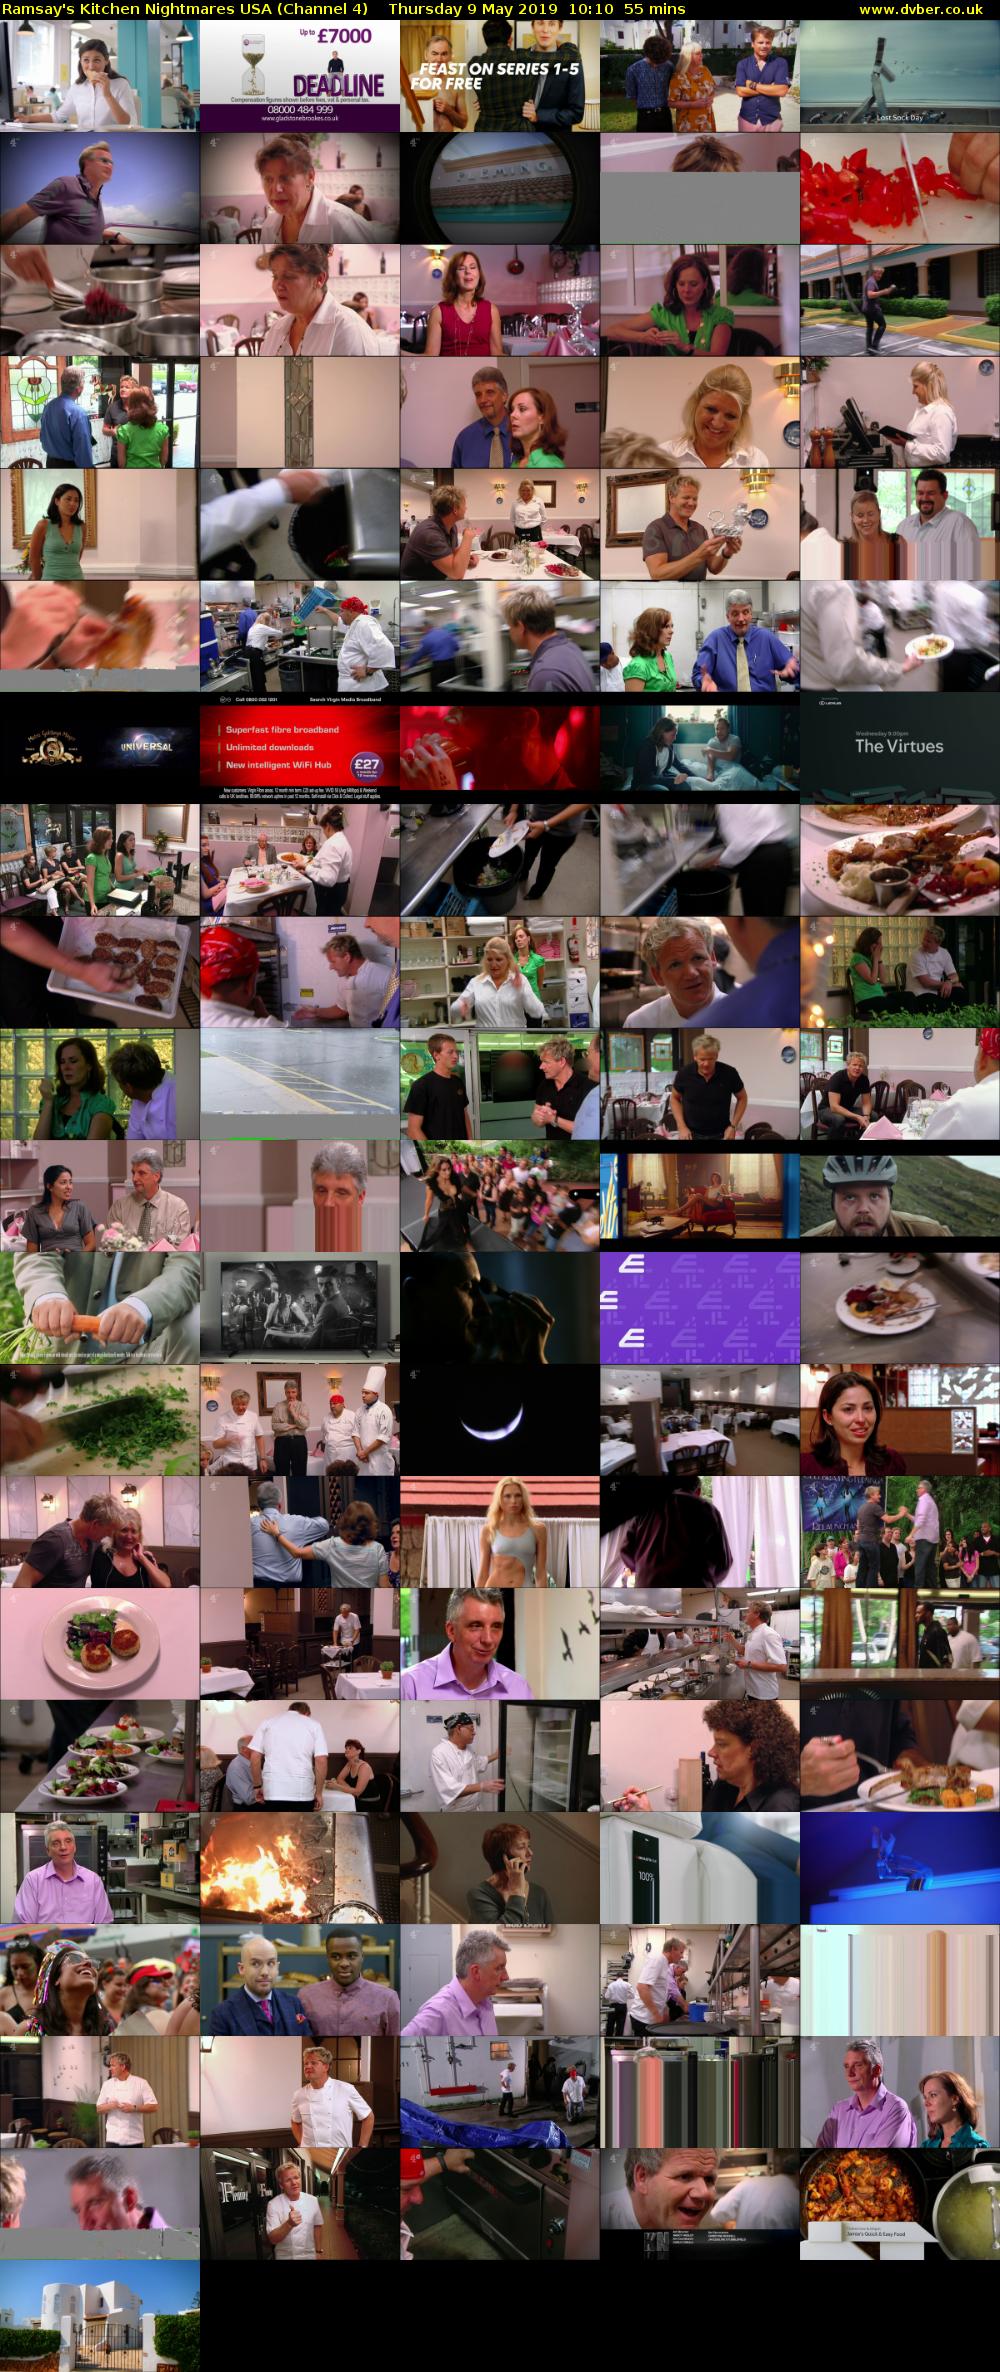 Ramsay's Kitchen Nightmares USA (Channel 4) Thursday 9 May 2019 10:10 - 11:05